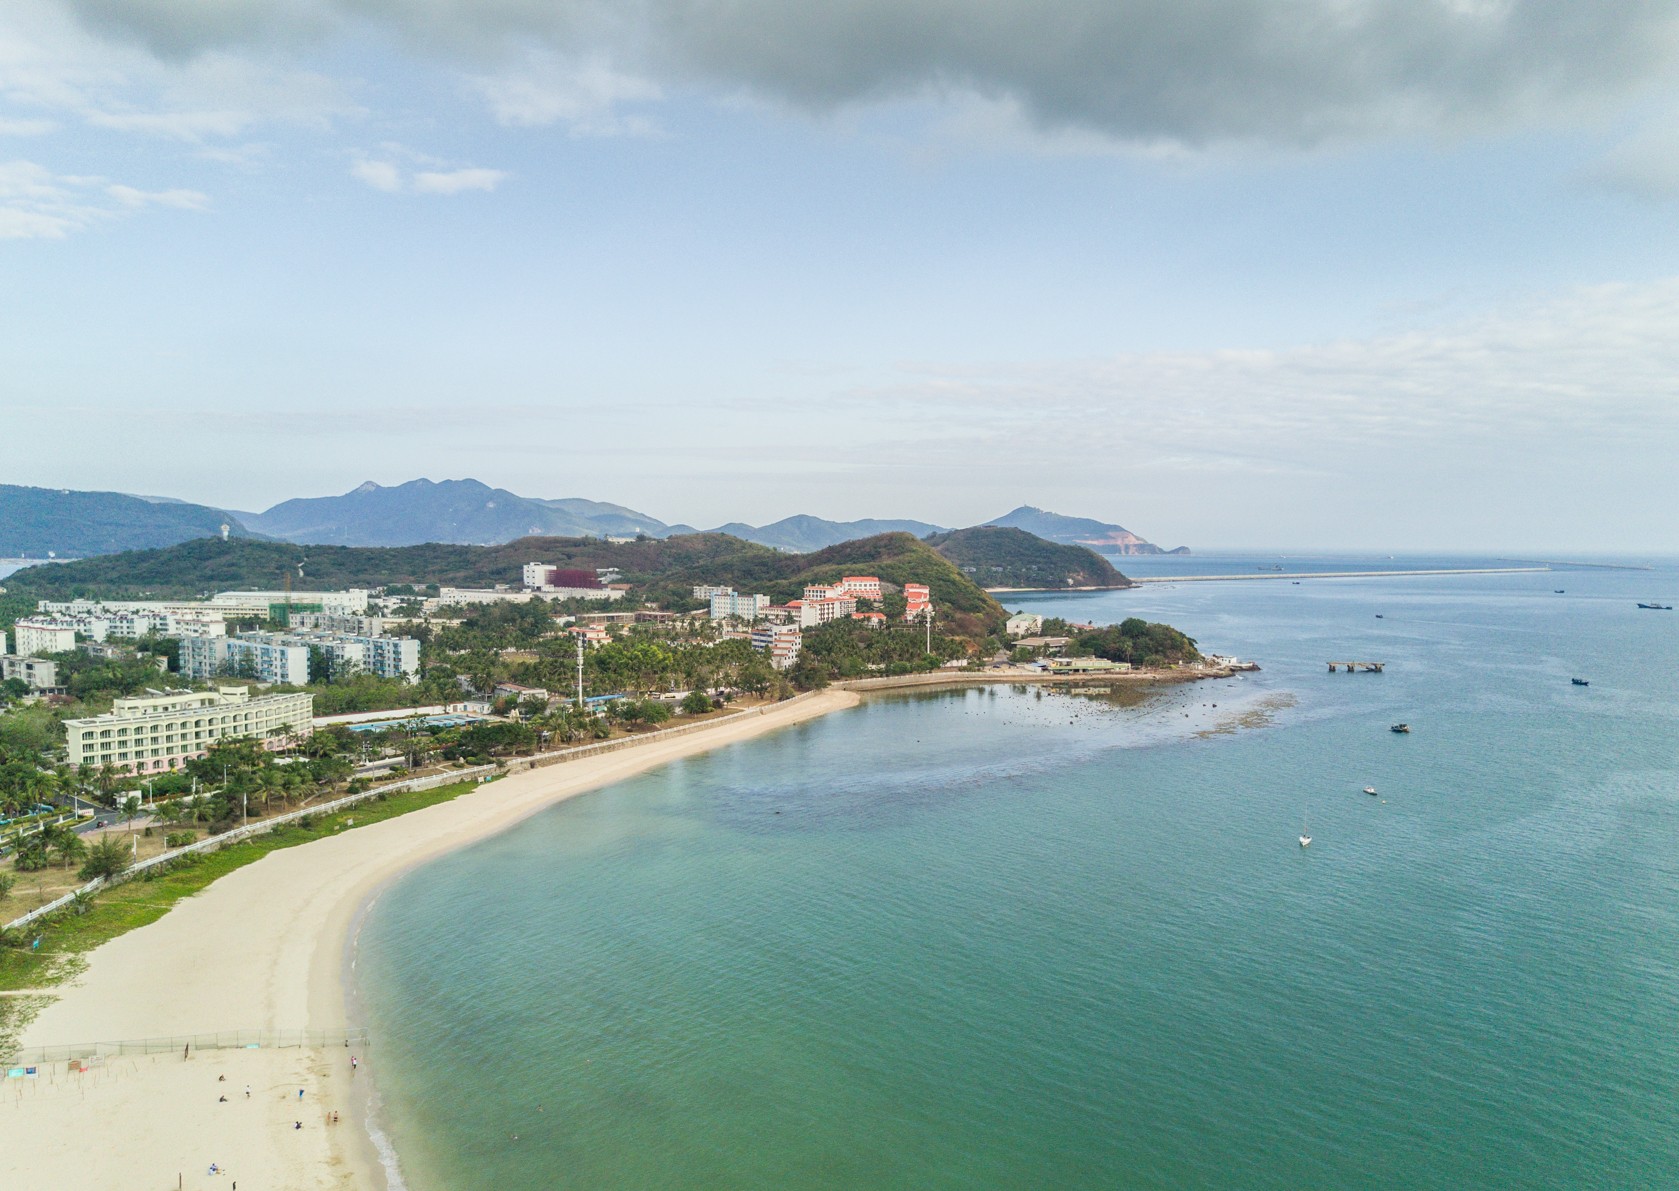 Yalong Bay, Sanya. The beach at Yalong Bay is one of the cleanest and least crowded. Photo: Scott Jagger